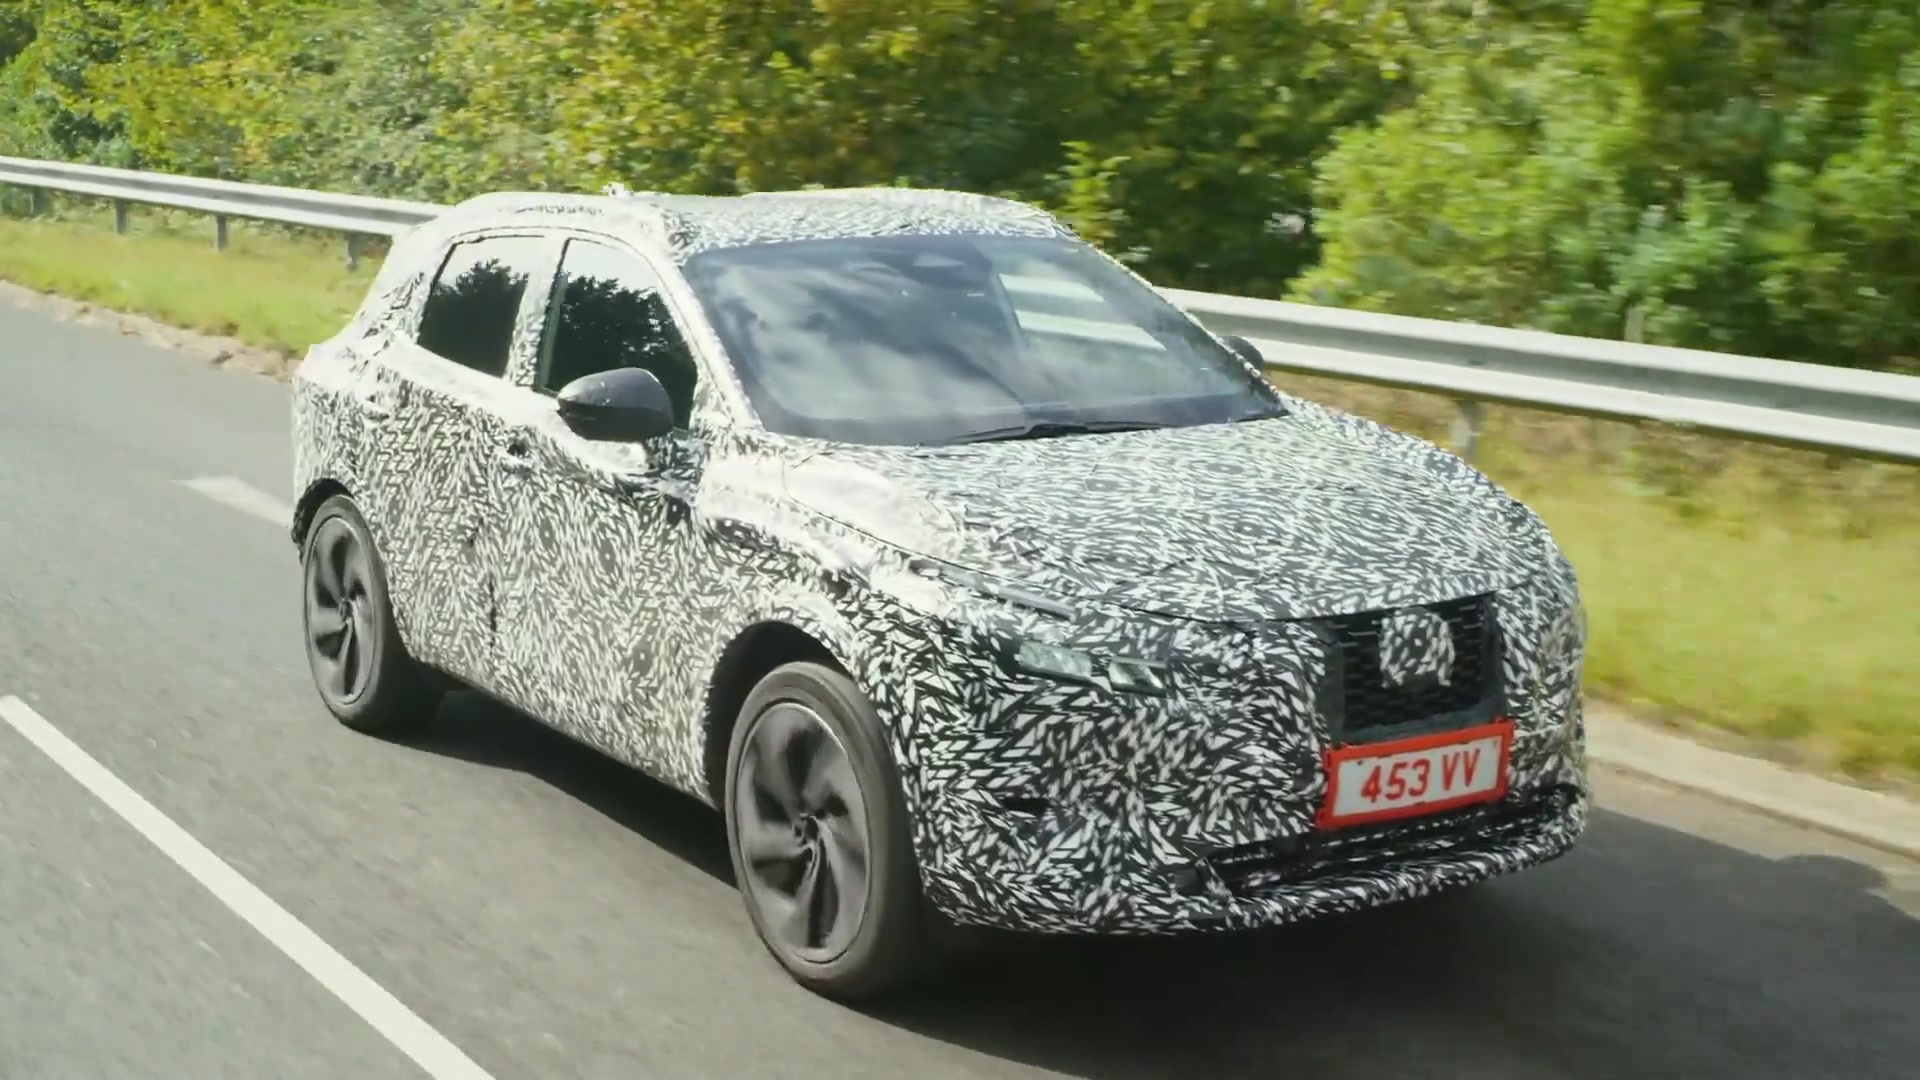 The new Nissan Qashqai – the 3rd generation is coming